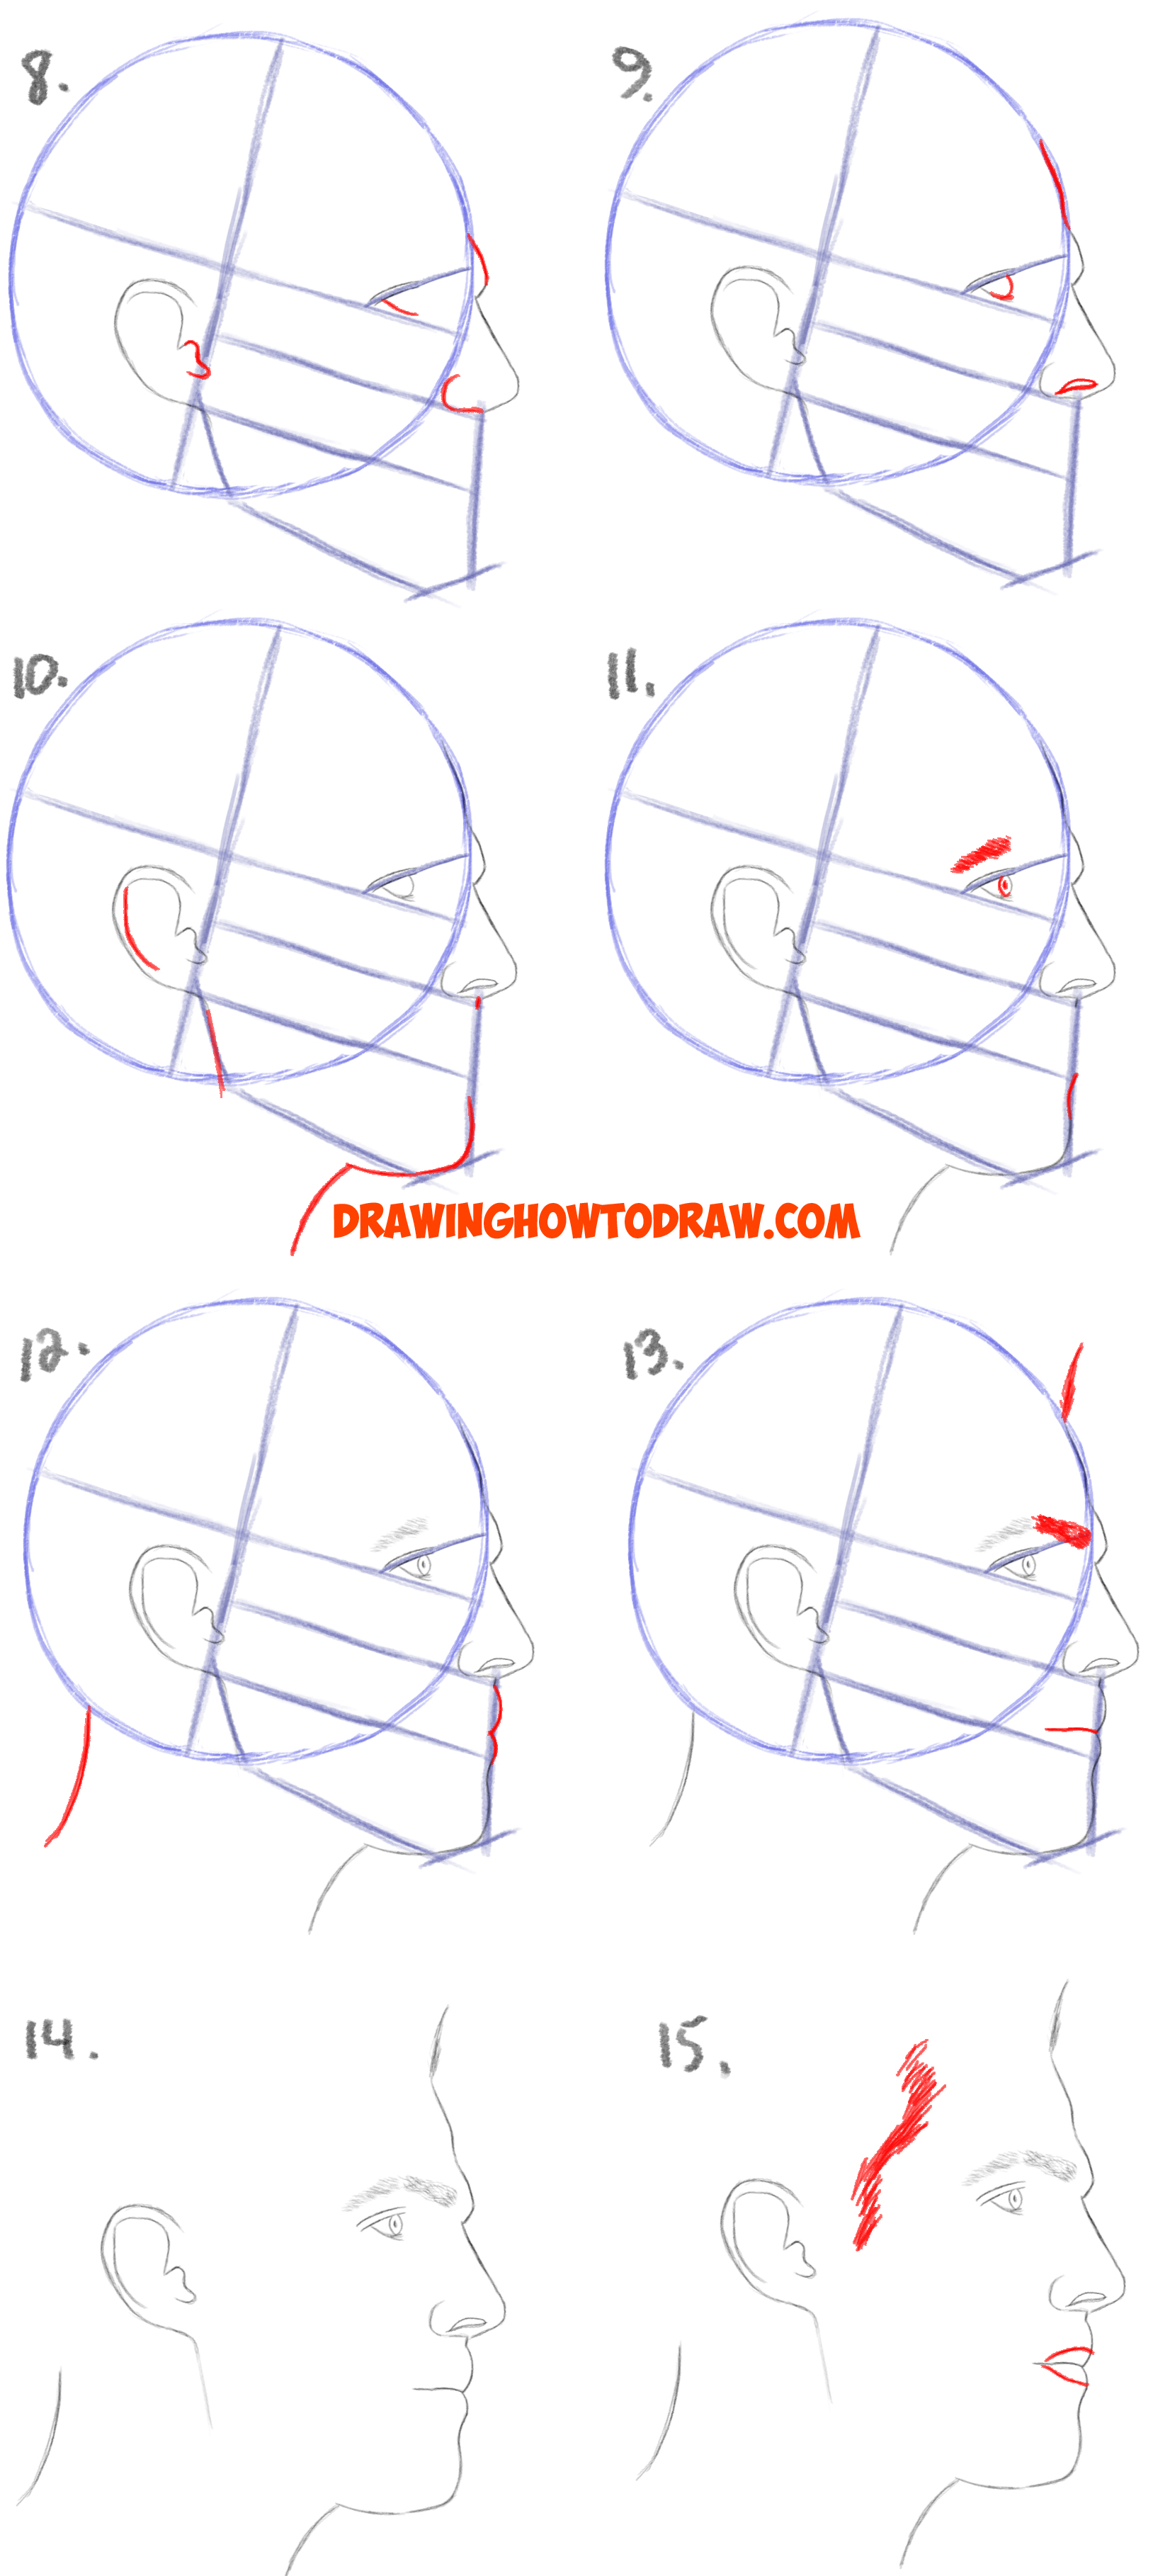 How to Draw a Face from the Side Profile View (Male / Man) Easy Step by